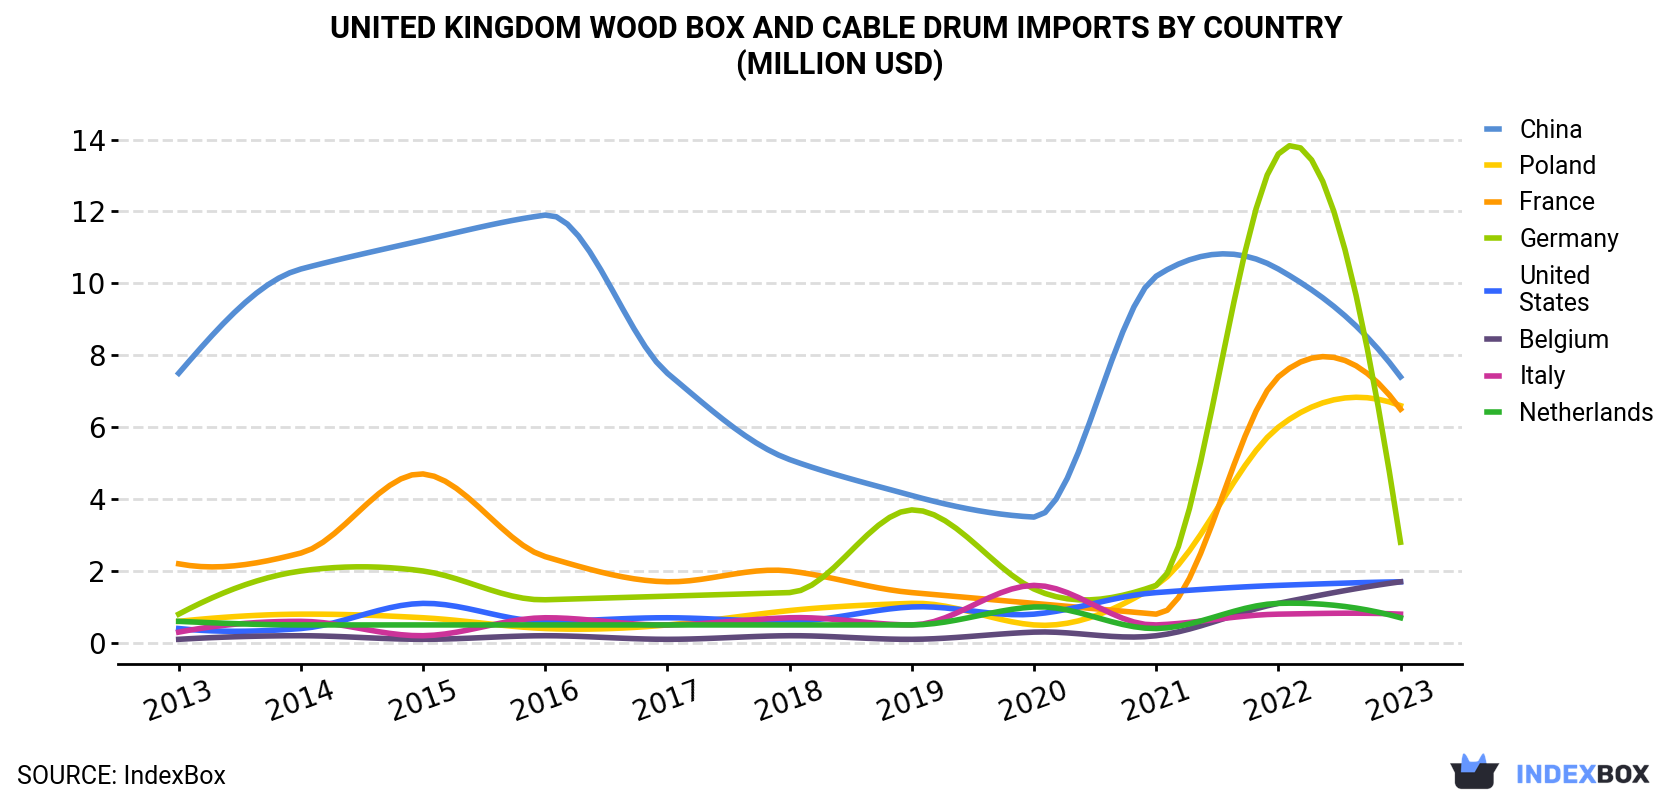 United Kingdom Wood Box and Cable Drum Imports By Country (Million USD)